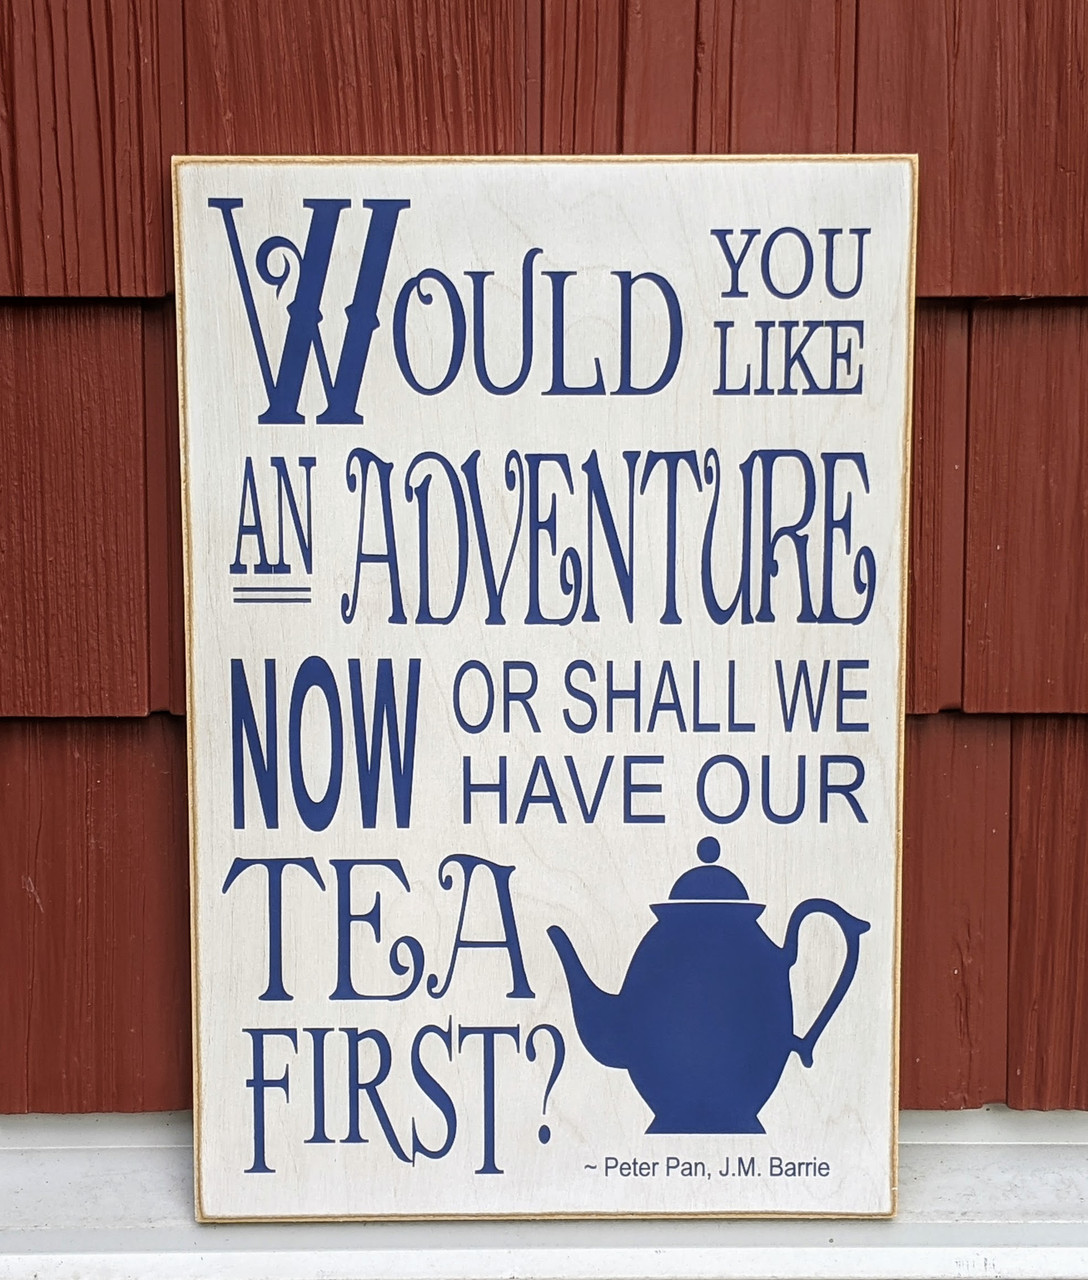 Would you like an adventure now or shall we have our tea first?